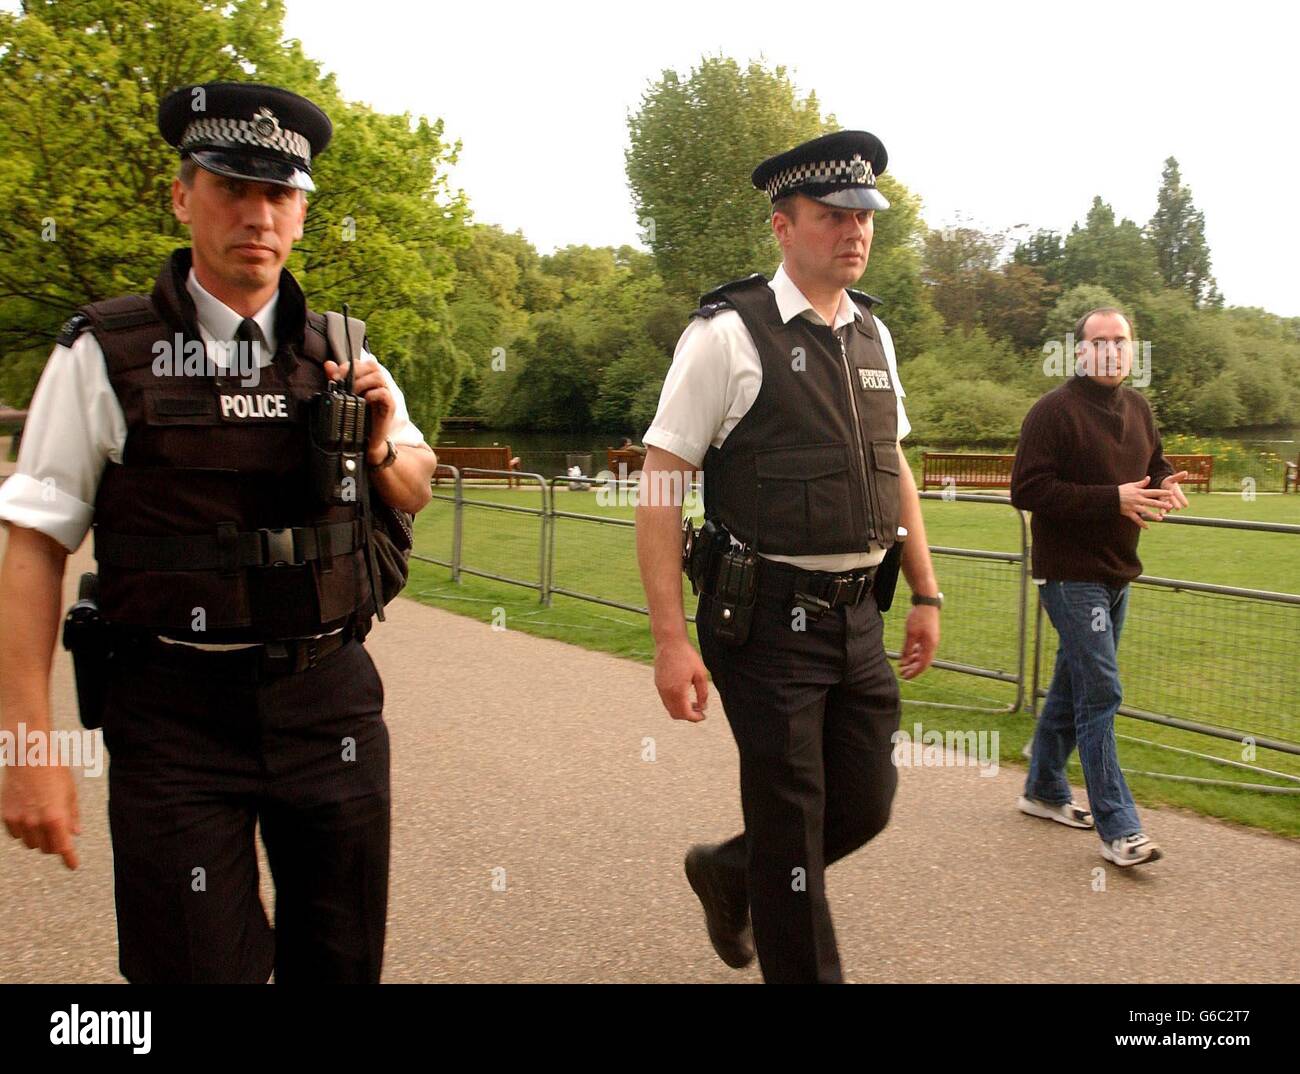 In a heightened security awareness armed police on foot patrol in London's St.James's Park. Stock Photo